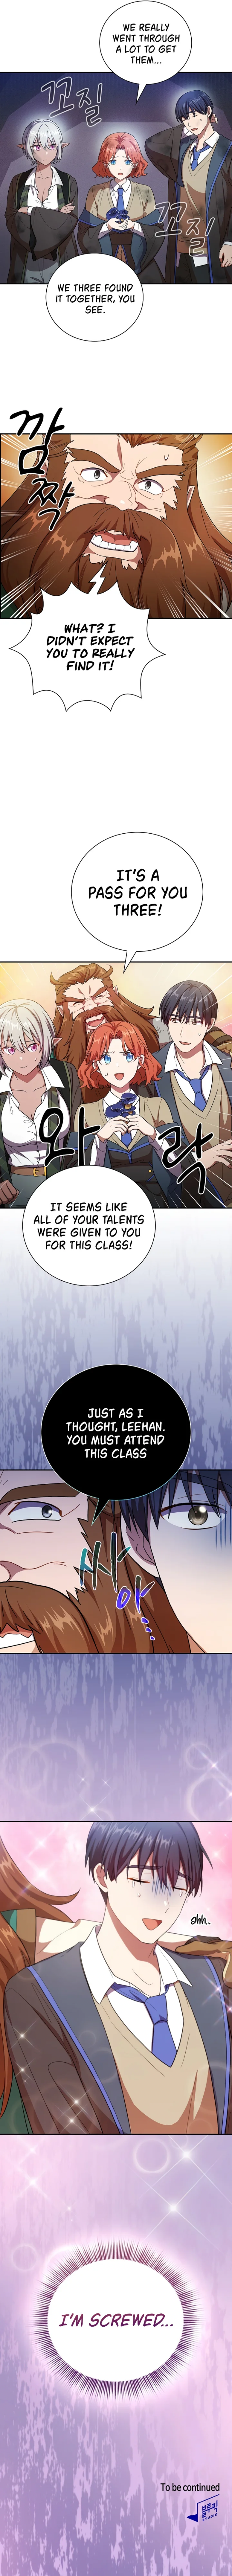 Magic Academy Survival Guide - Chapter 9 Page 11